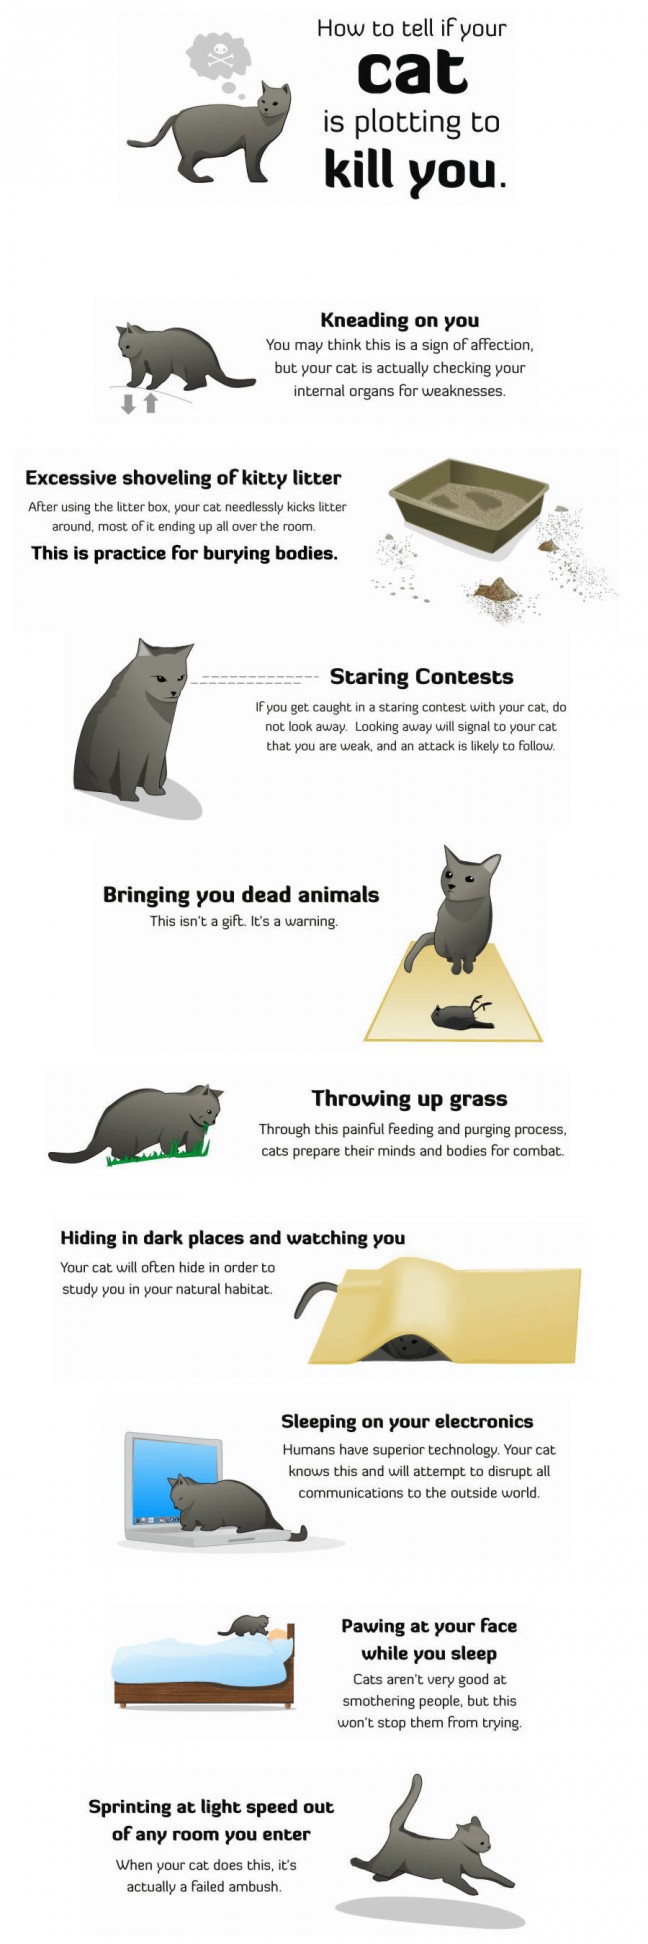 how to tell if your cat is trying to kill you.jpg